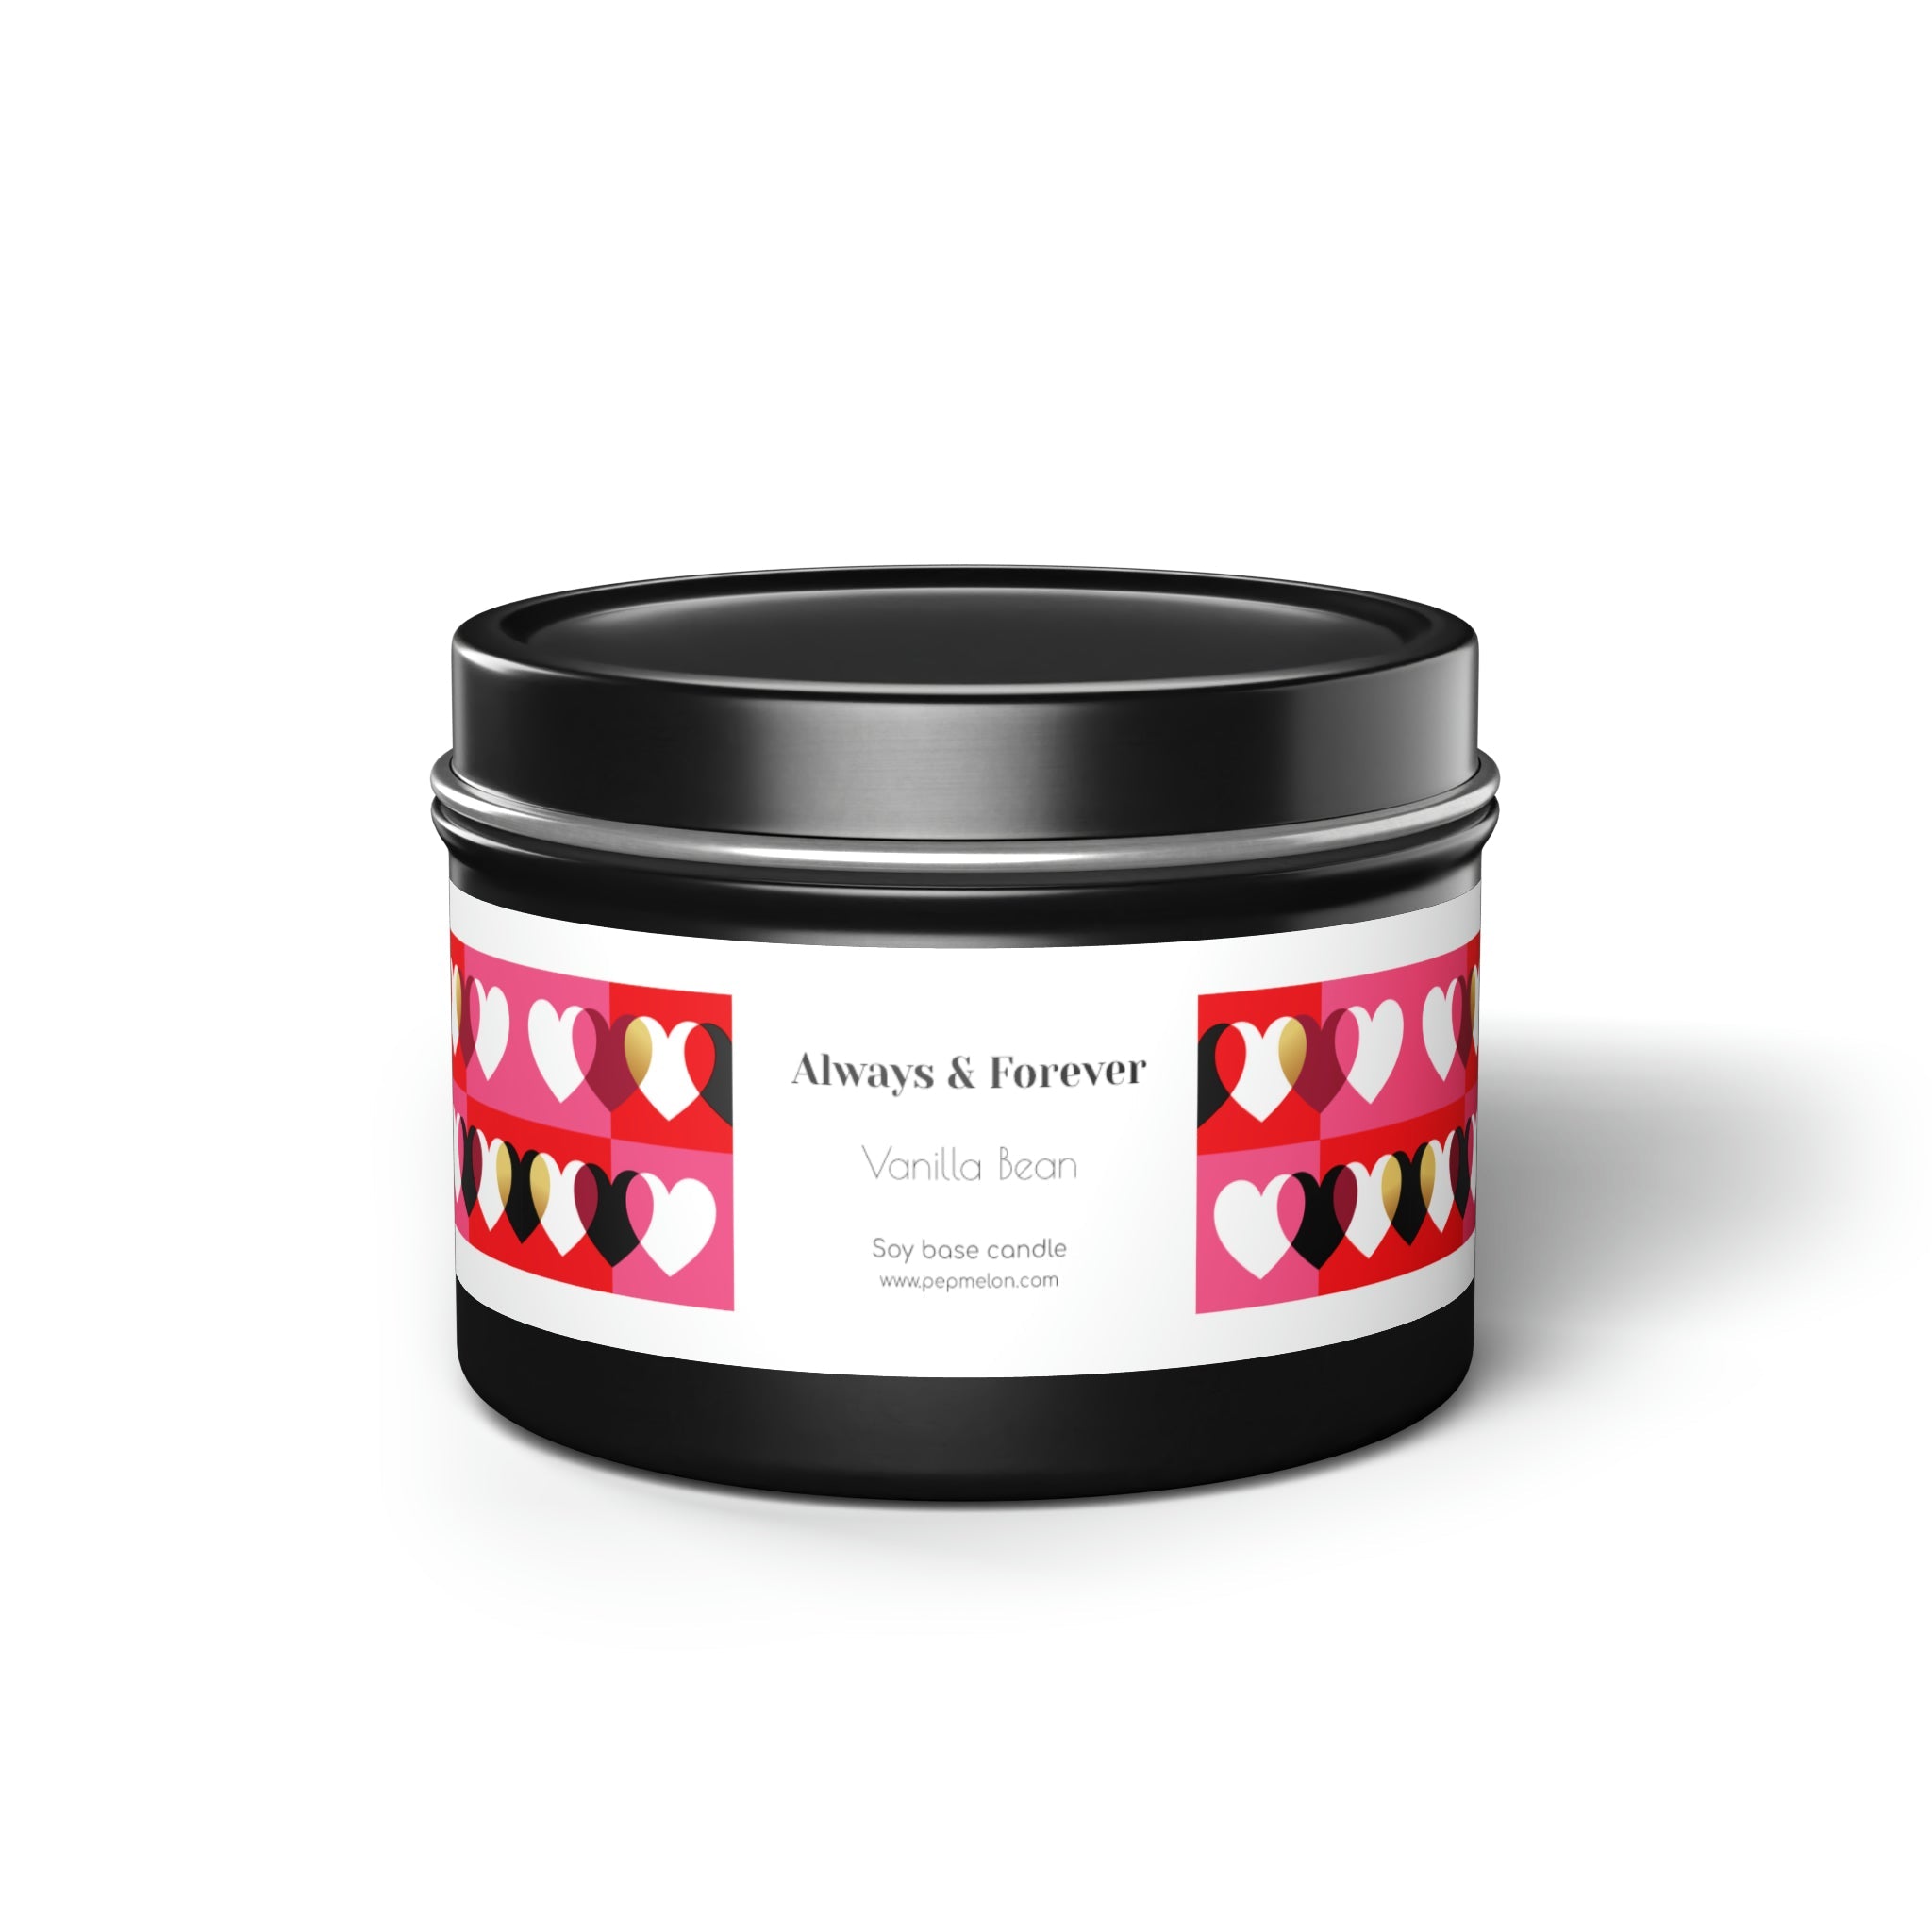 Vanilla Bean Always & Forever Soy base candle love, valentine's day gift Tin Candles-18